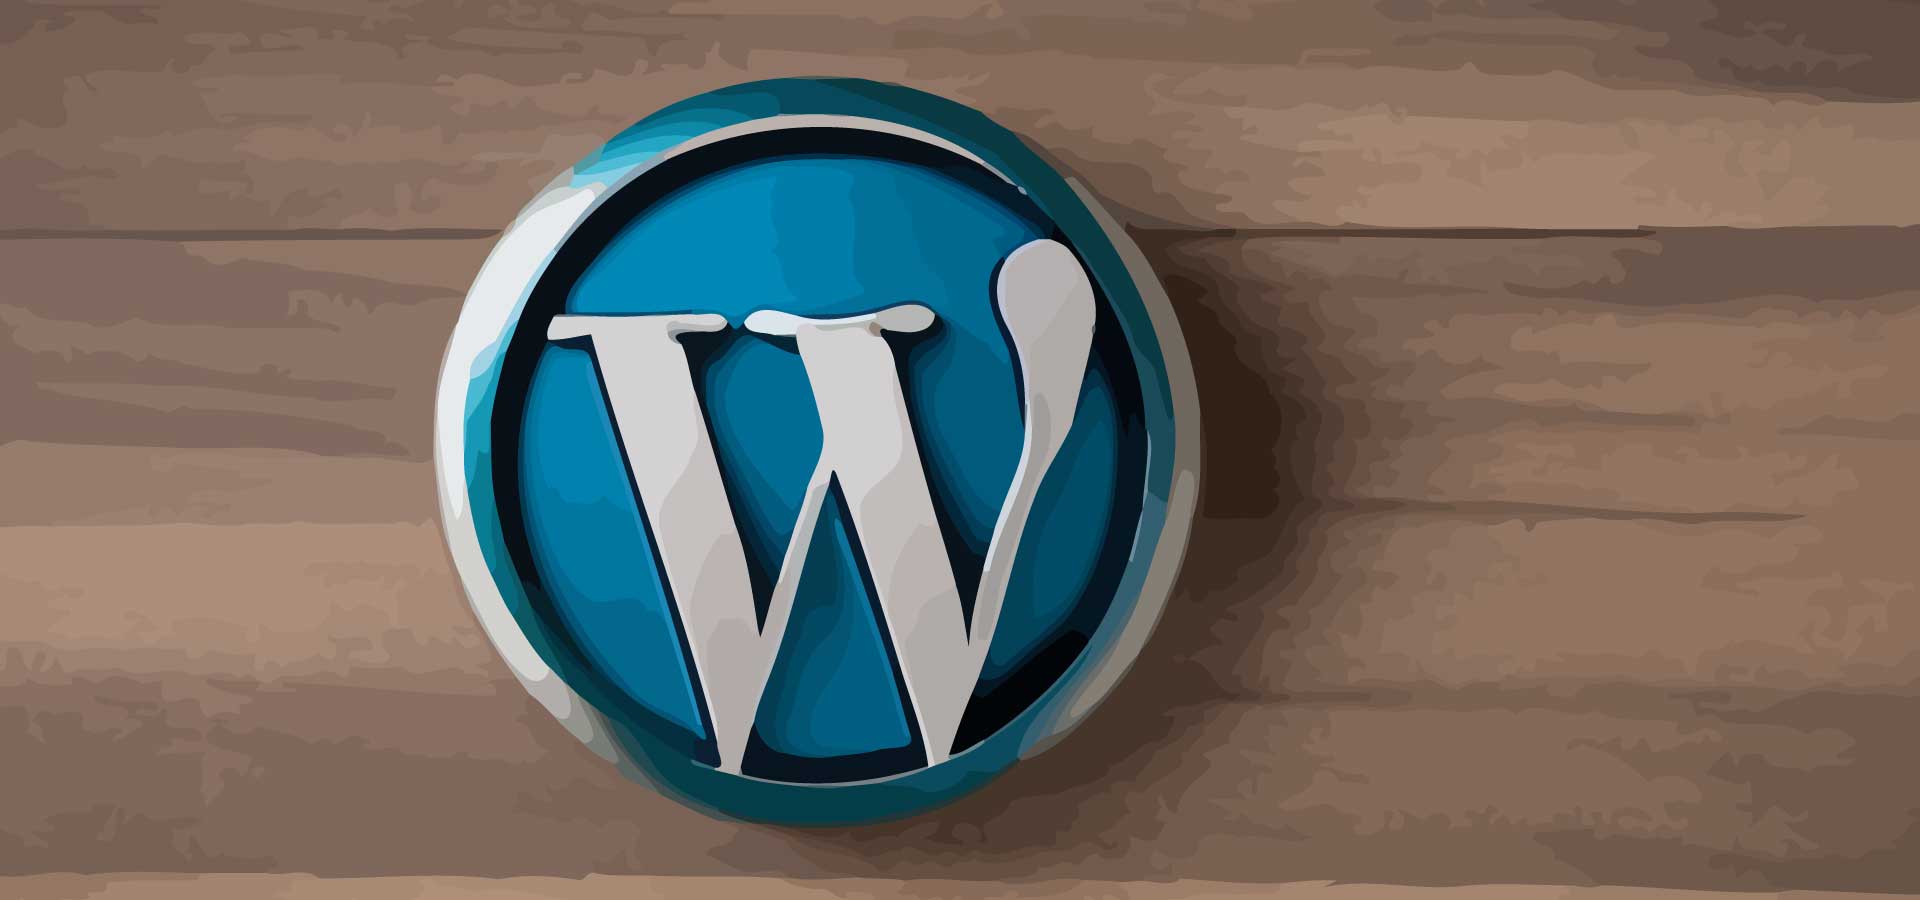 10 Essential Tips for Securing Your WordPress Website